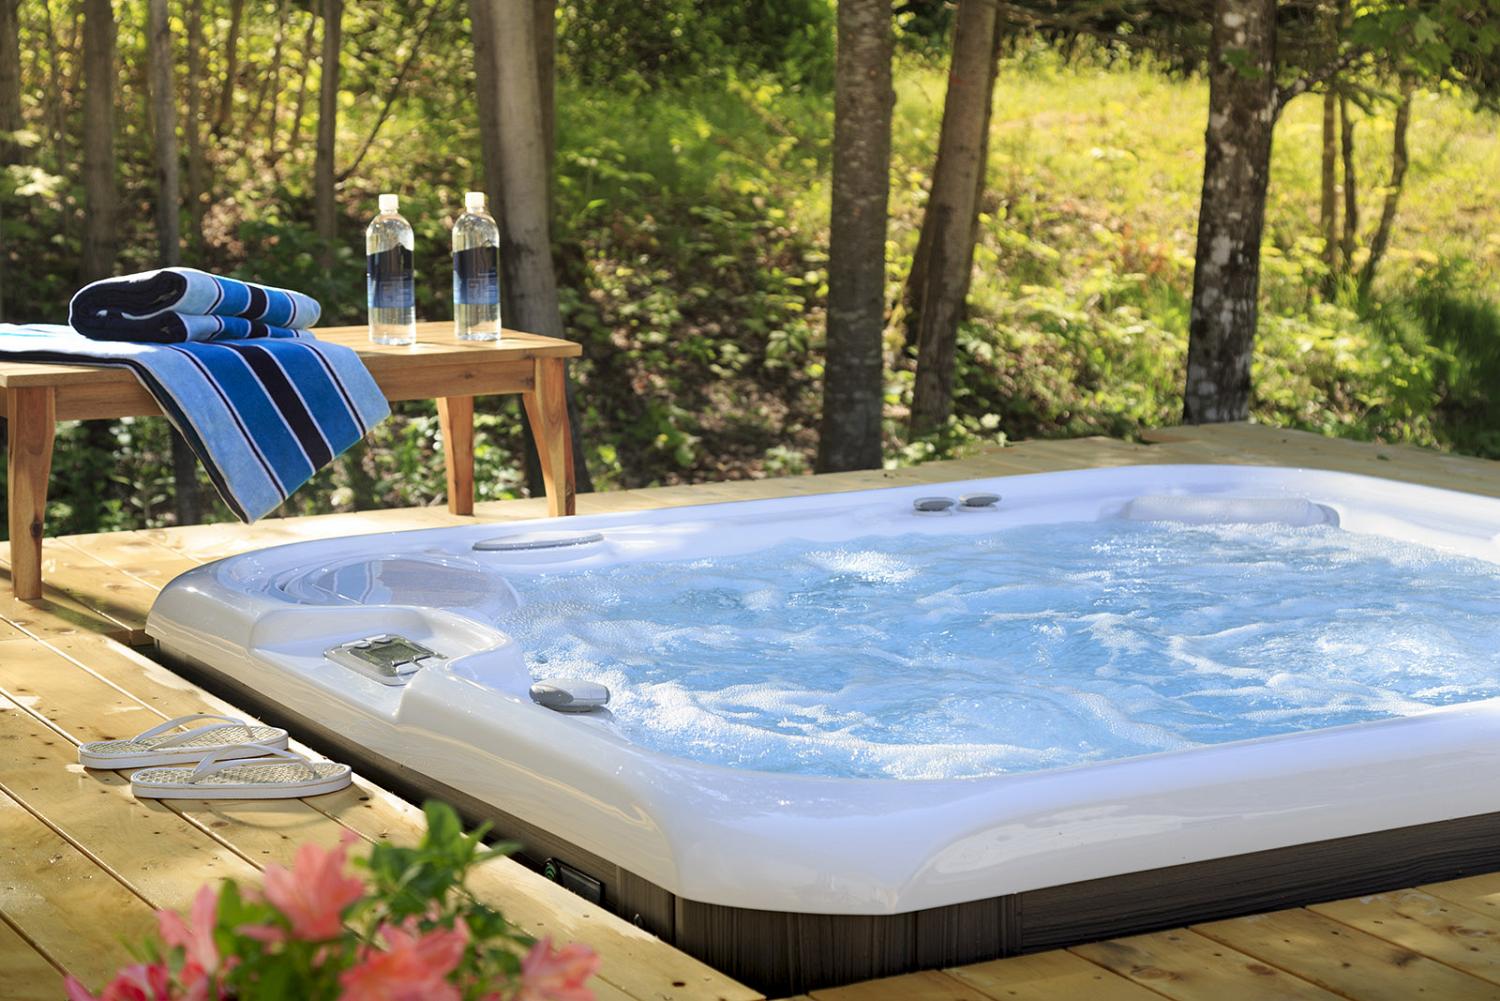 How To Cool A Hot Tub